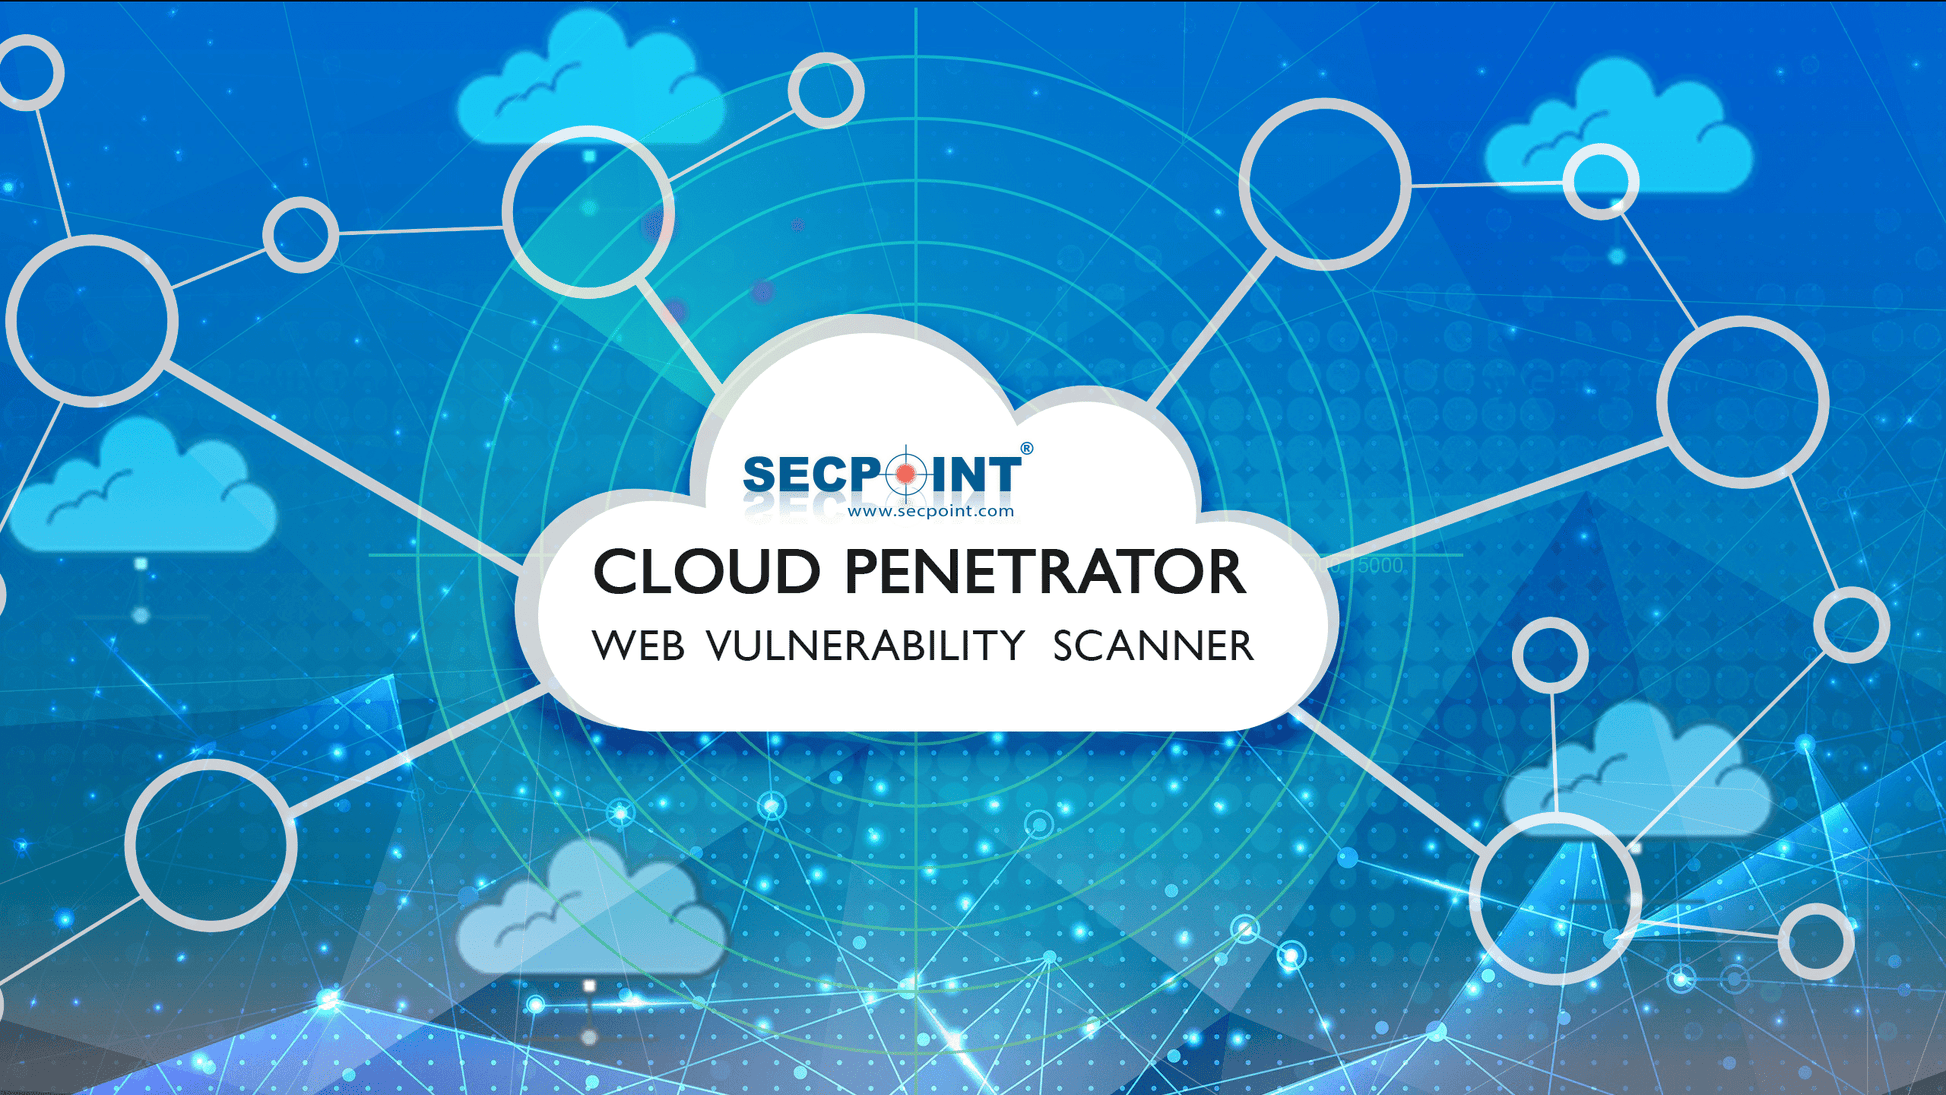 SecPoint Cloud Penetrator S9 - Vulnerability Scanning of 64 IPs for 3 Years Static Scan License - SecPoint